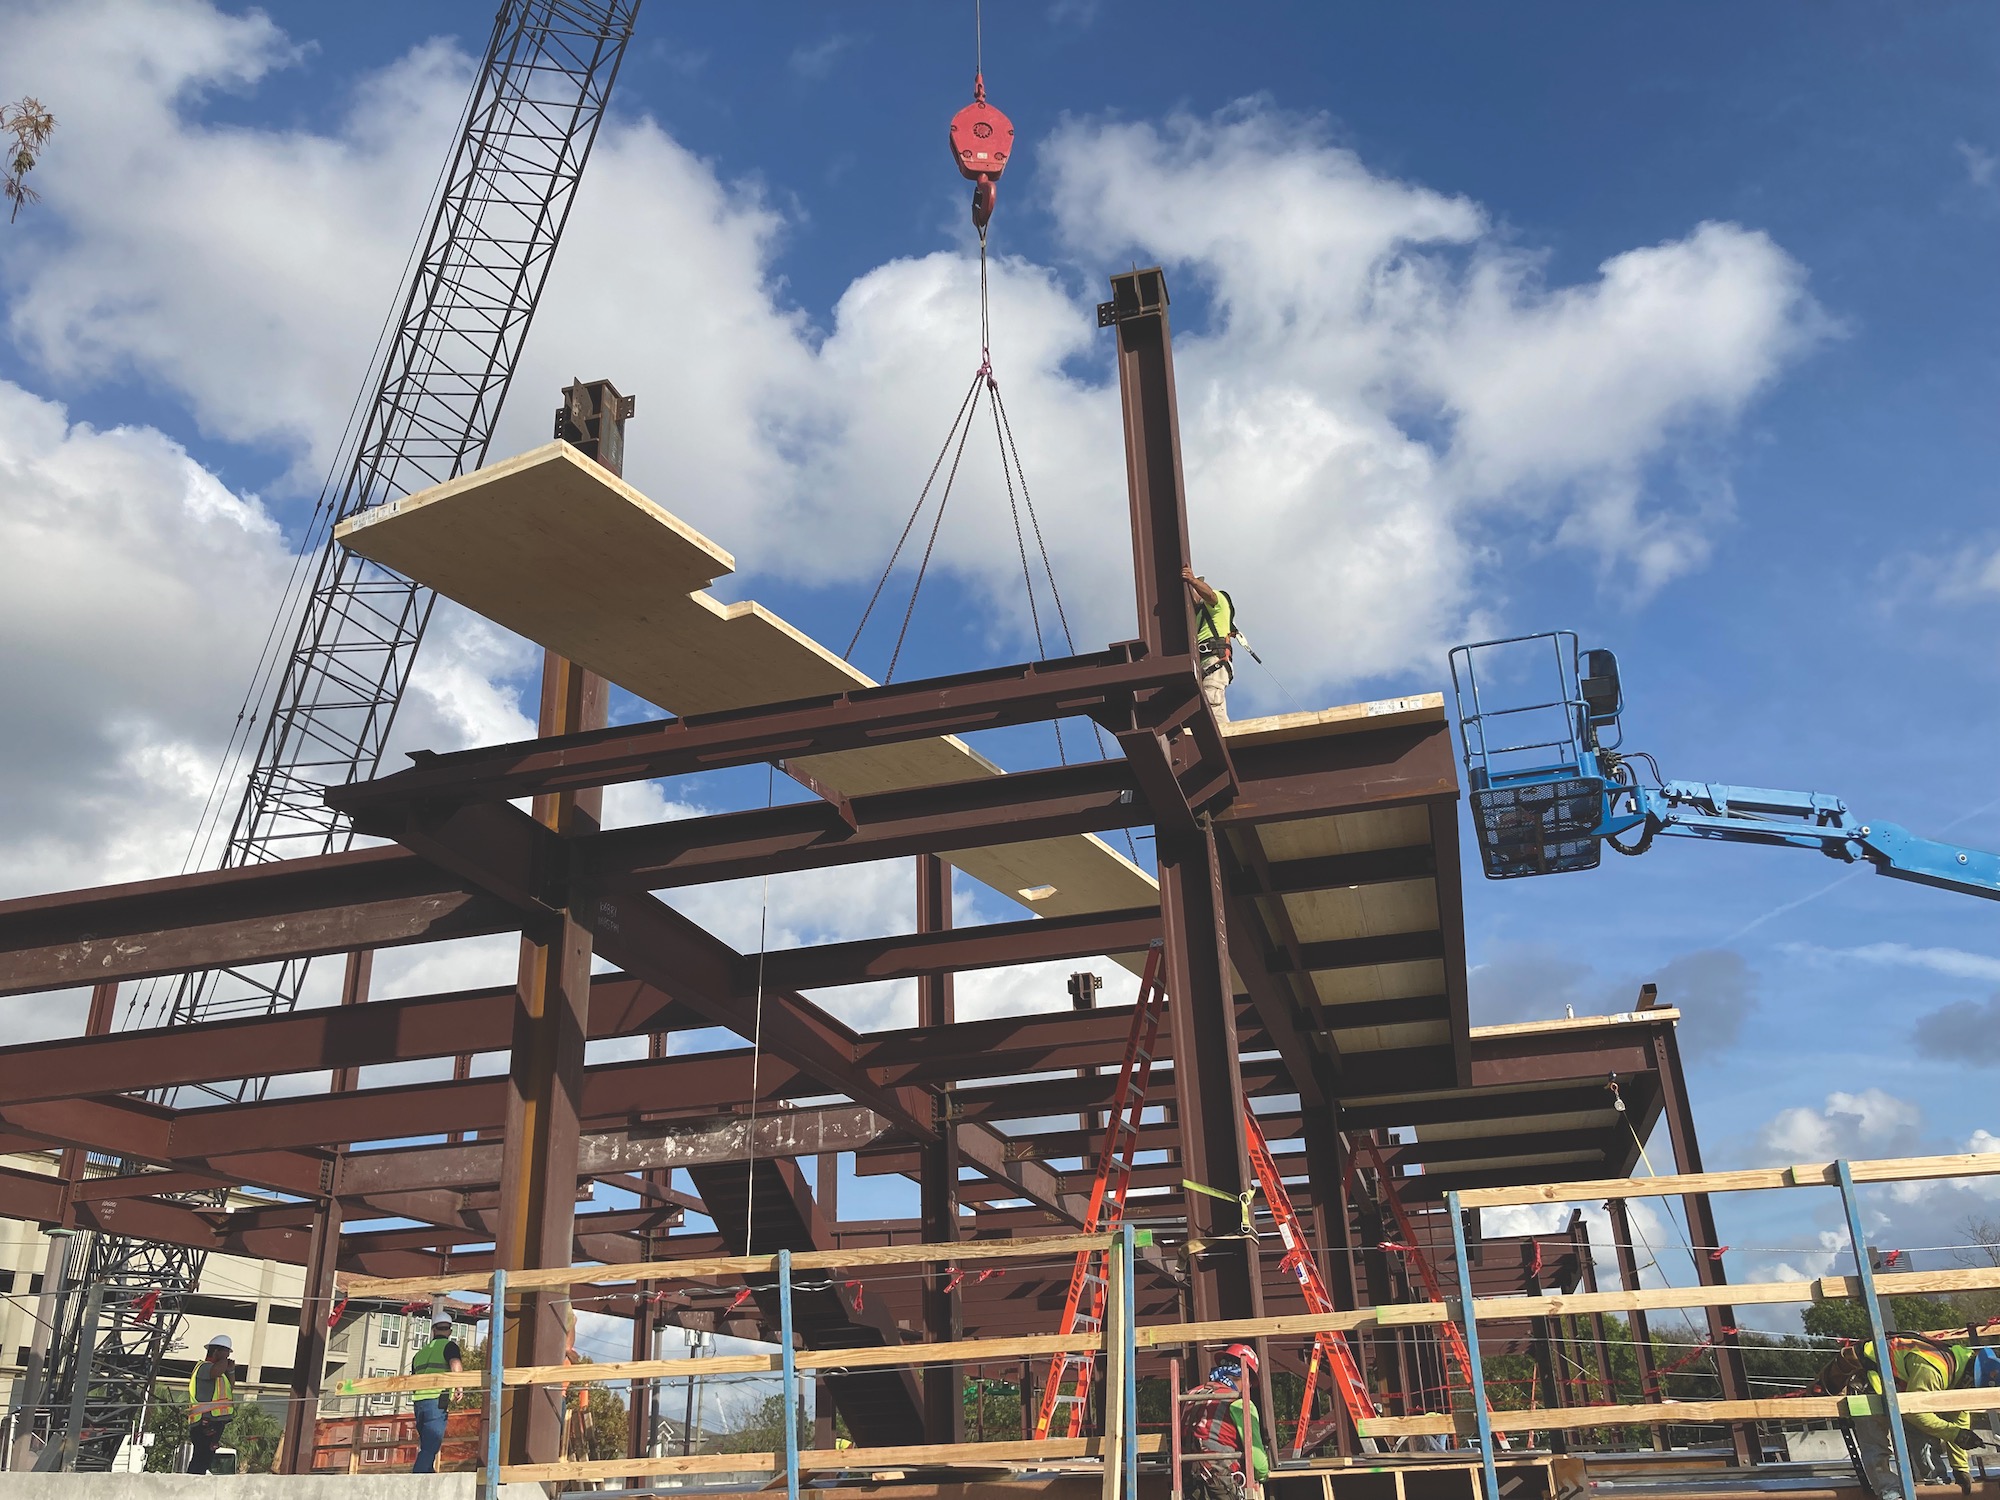 AIA course - Steel structures offer faster path to climate benefits